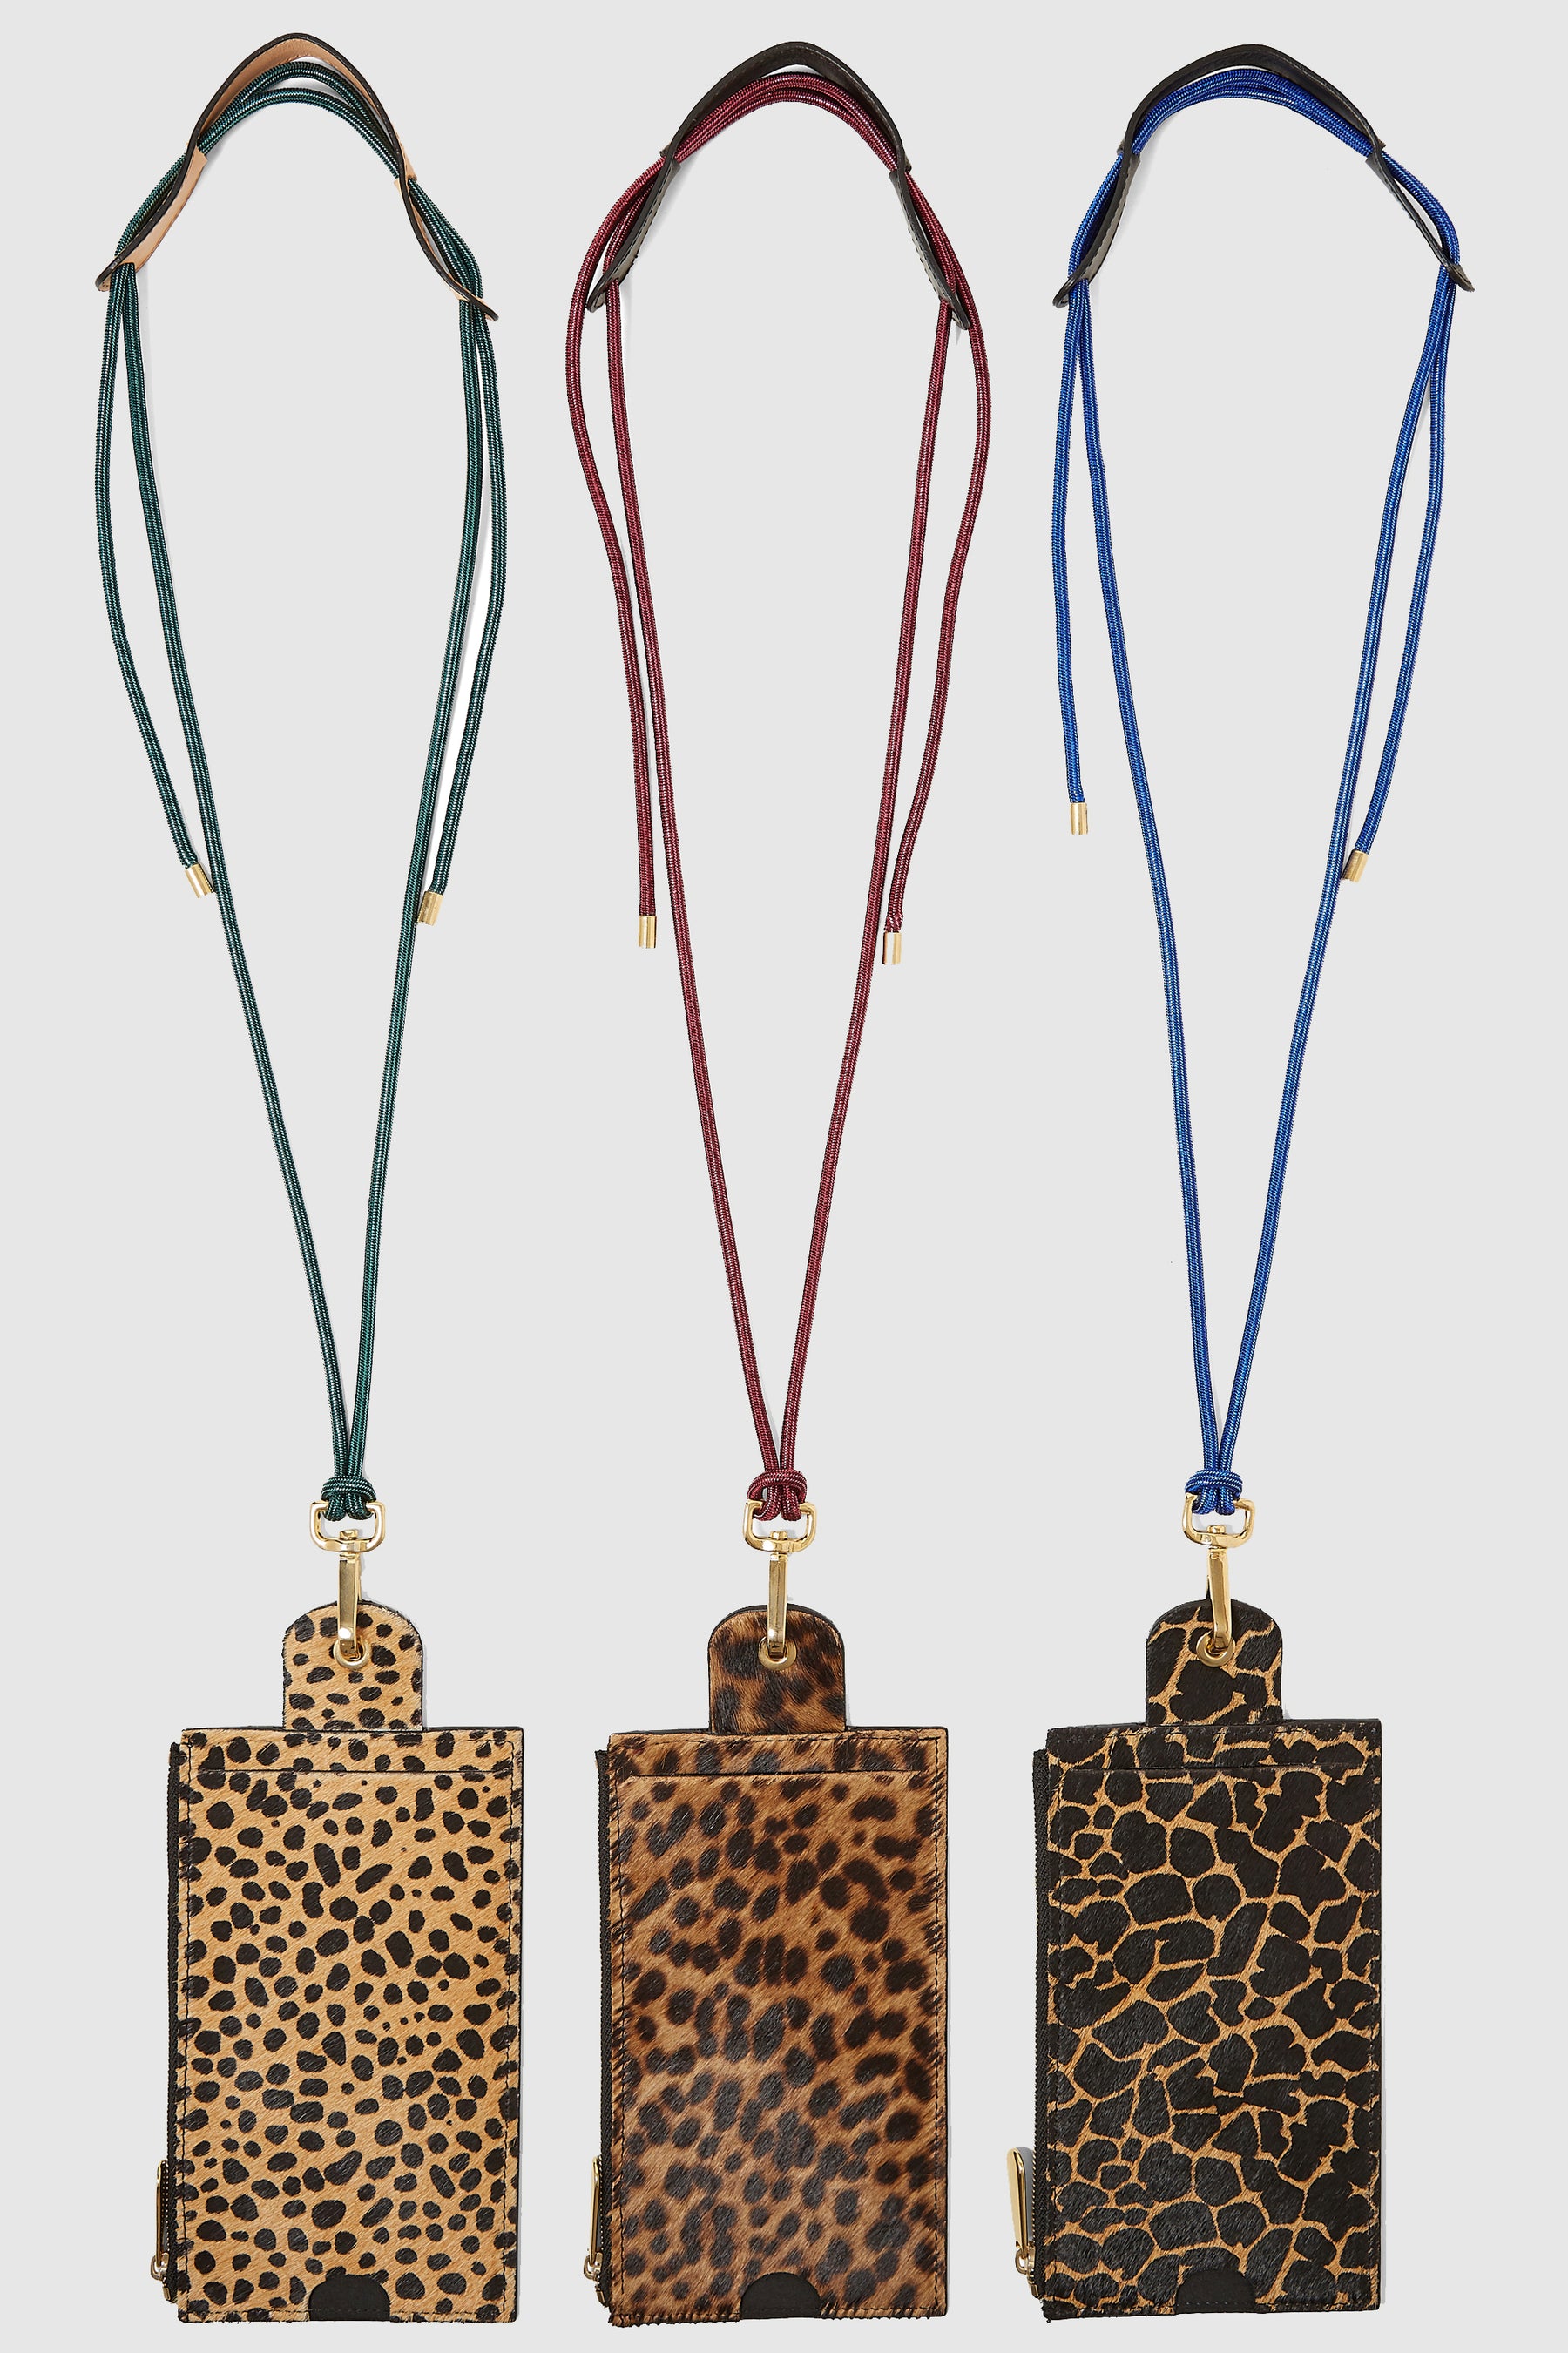 The Minis - Large neck wallet in Cheetah printed leather